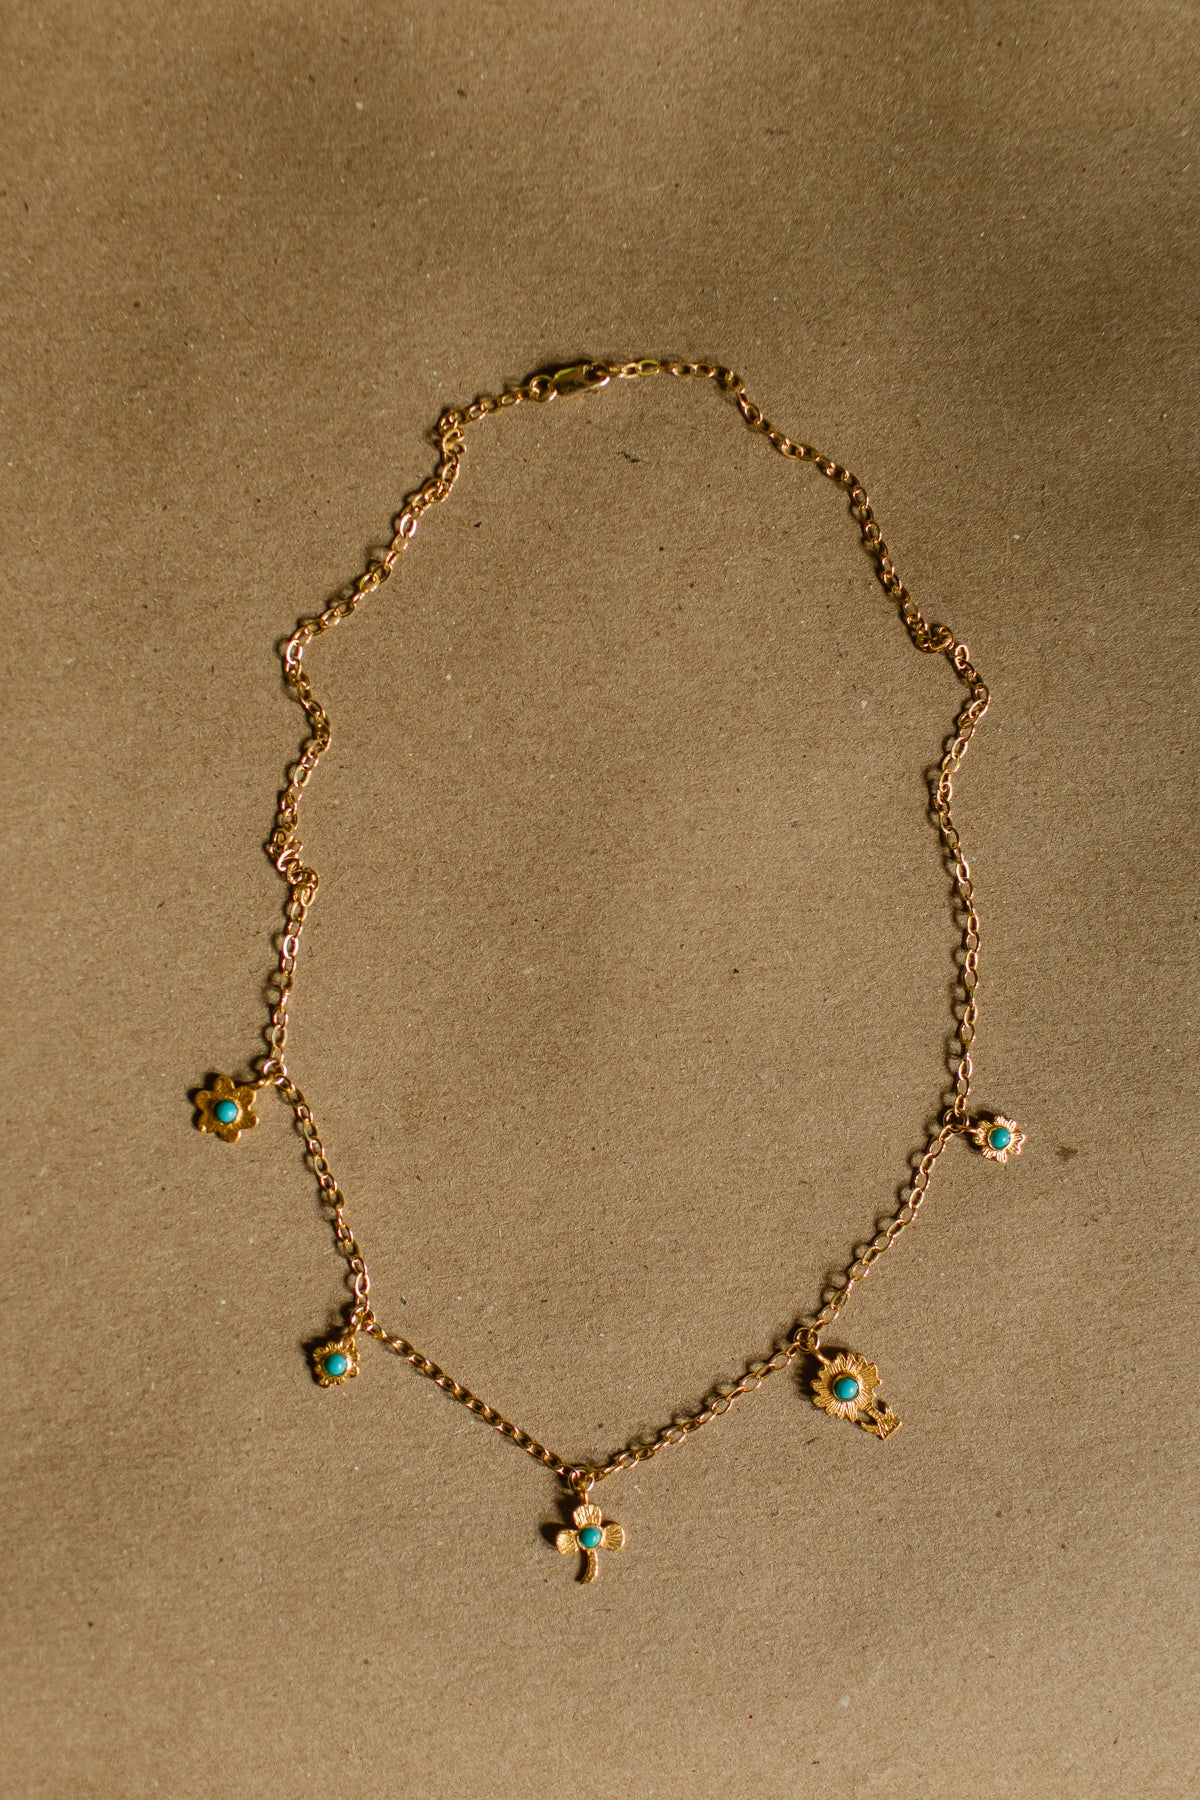 Heirloom lucky turquoise necklace in fine gold